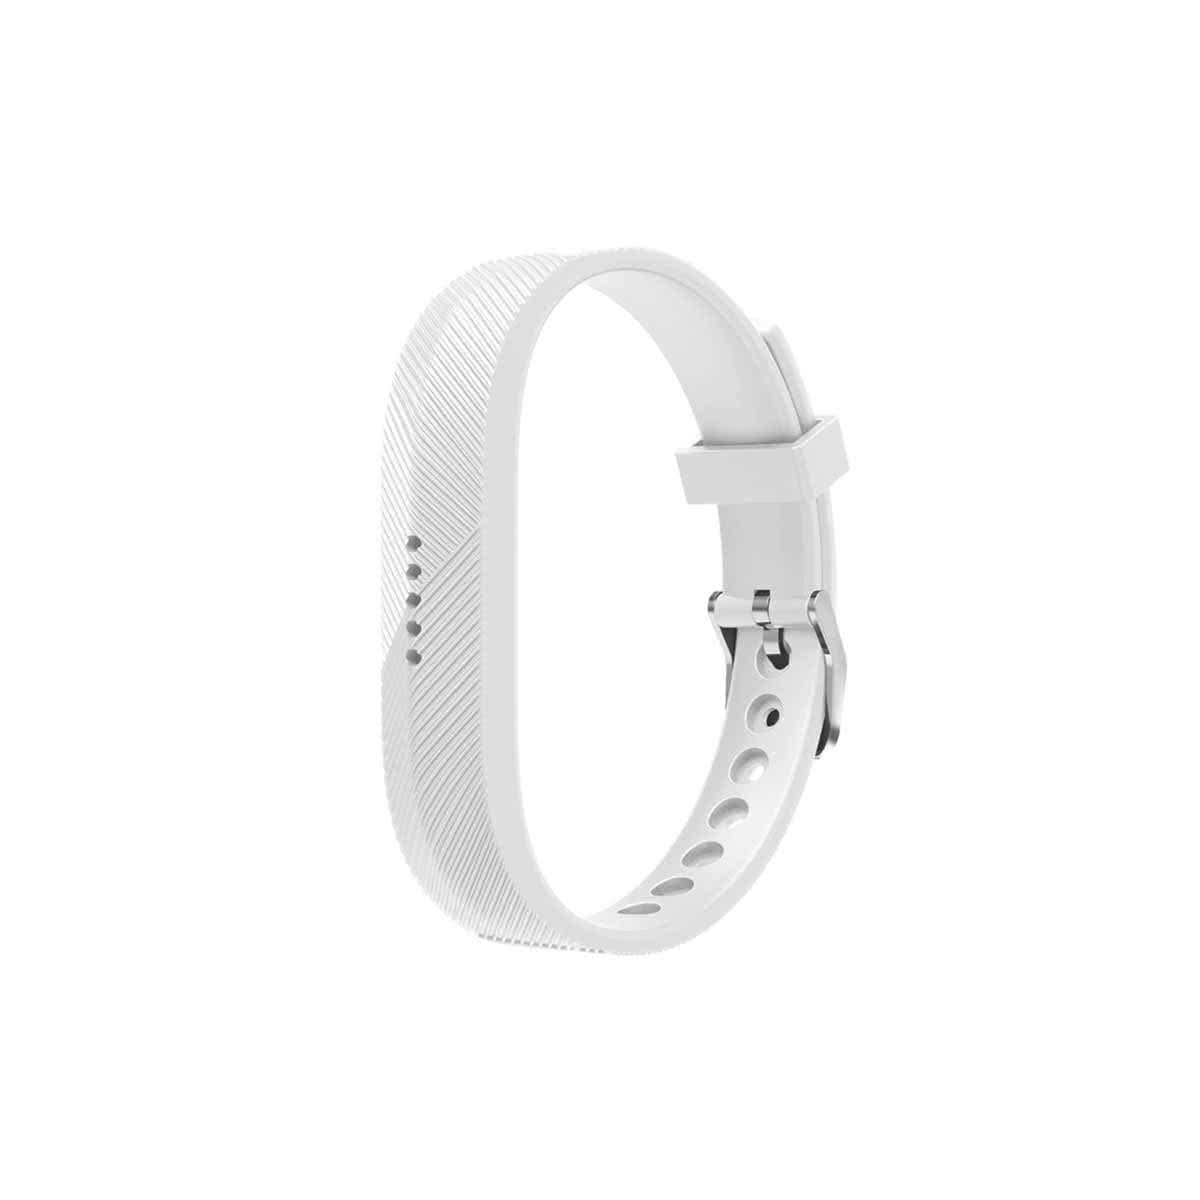 Secure Fitbit Flex 2 Band Replacement Strap with Buckle White  